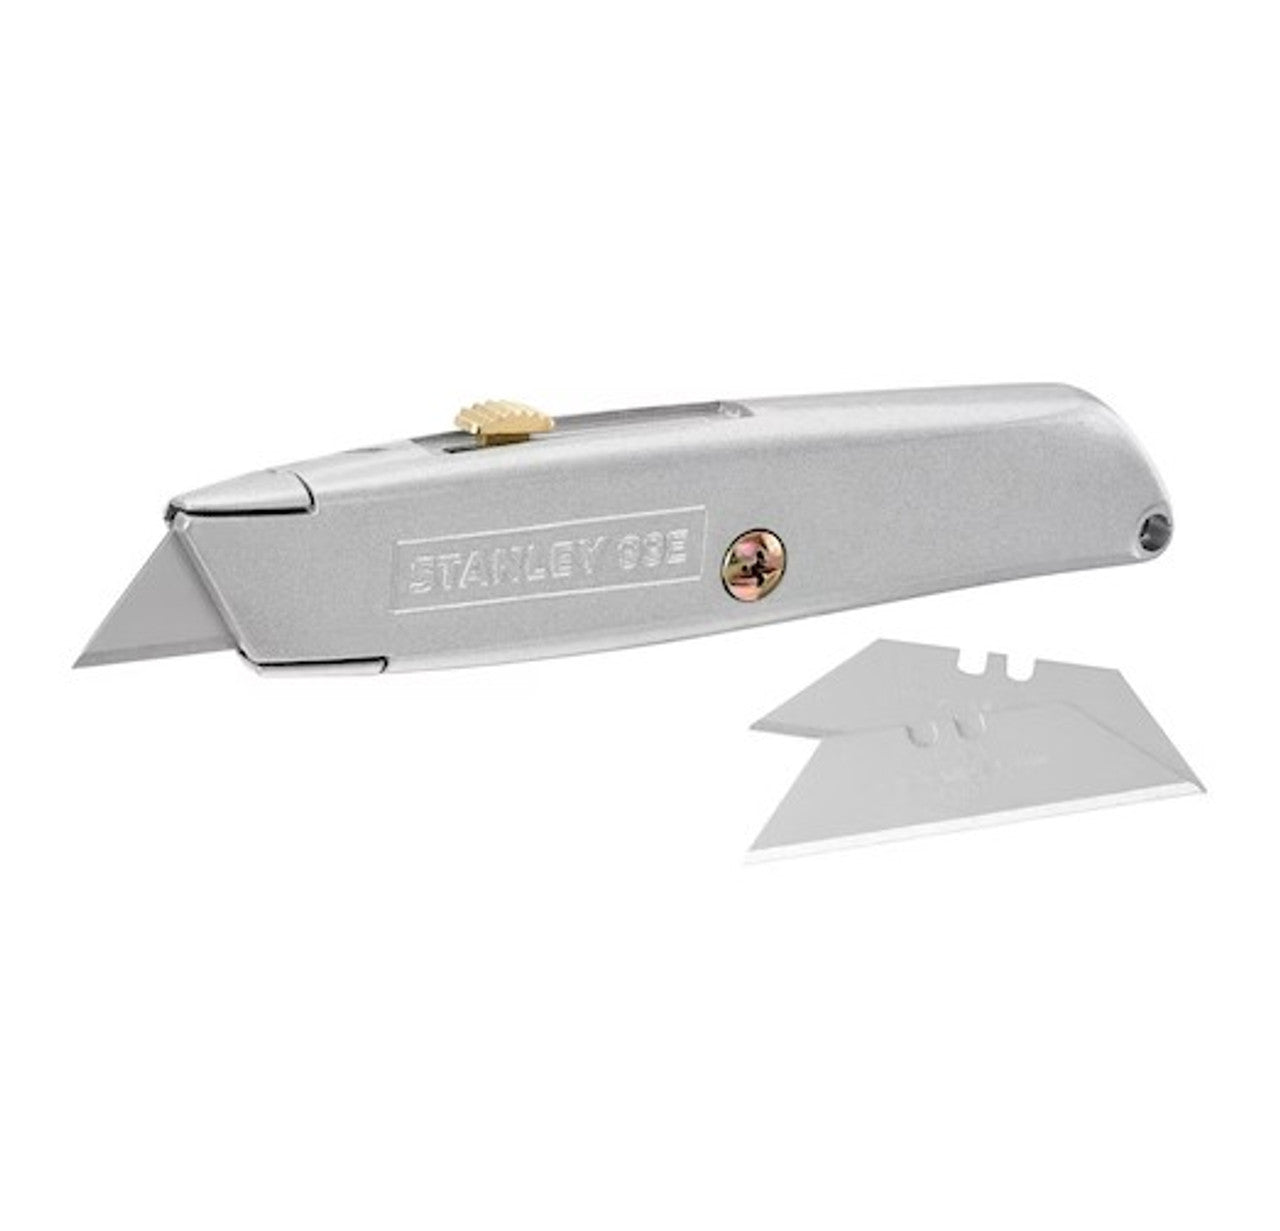 STANLEY® 99E Retractable Blade Utility Knife with 3 blades